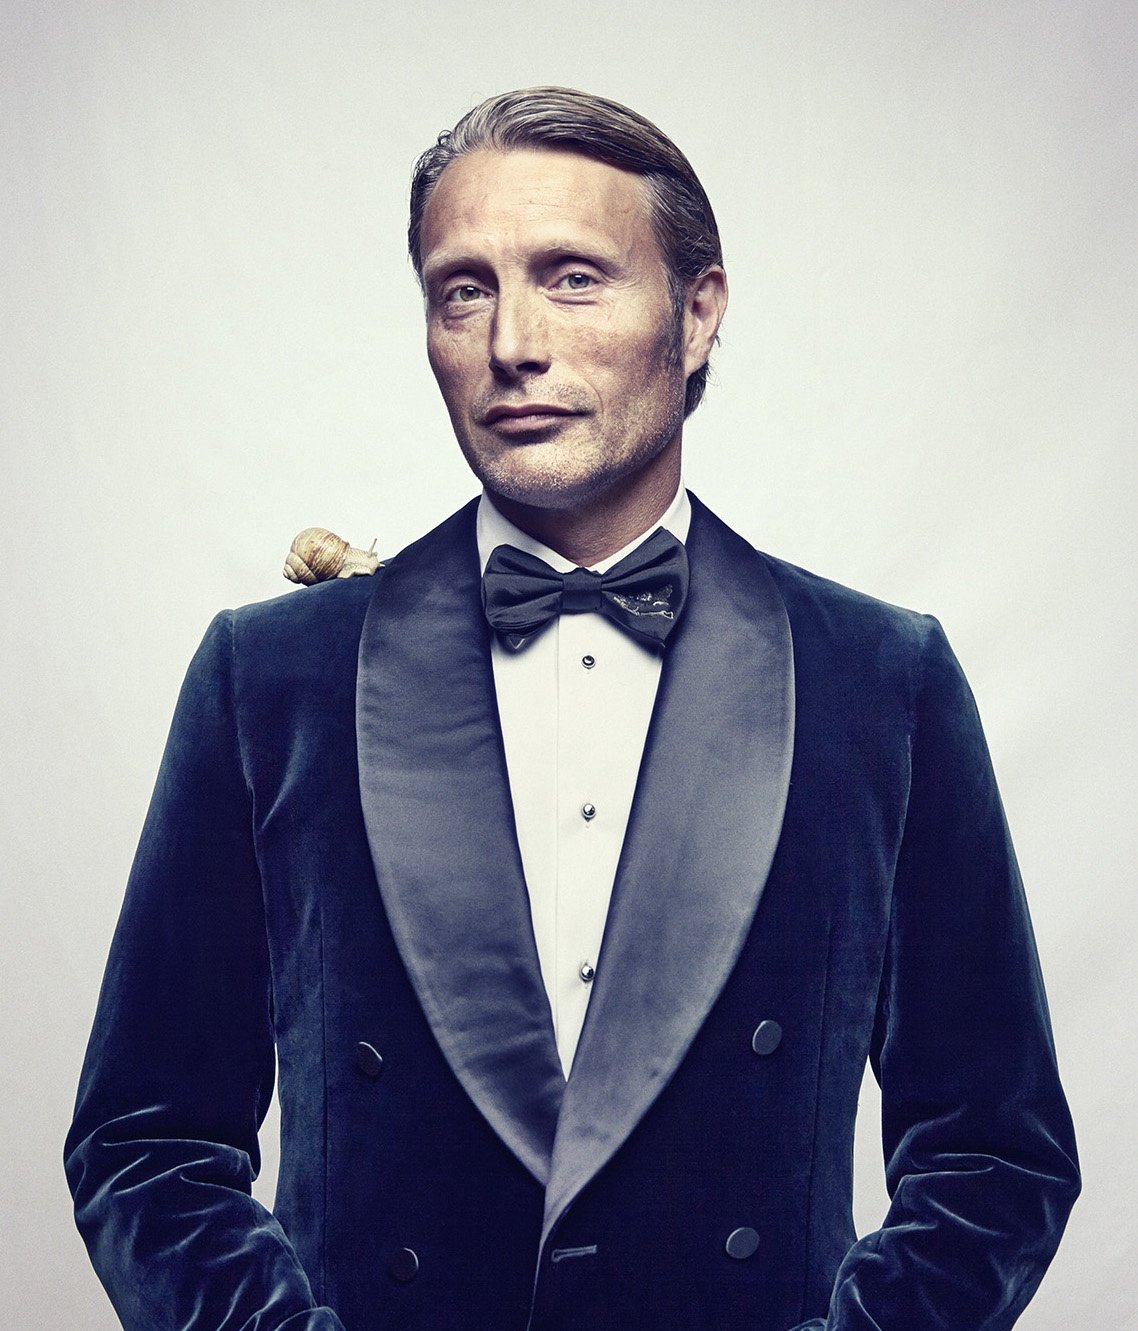 Happy birthday to the incredible mads mikkelsen! 